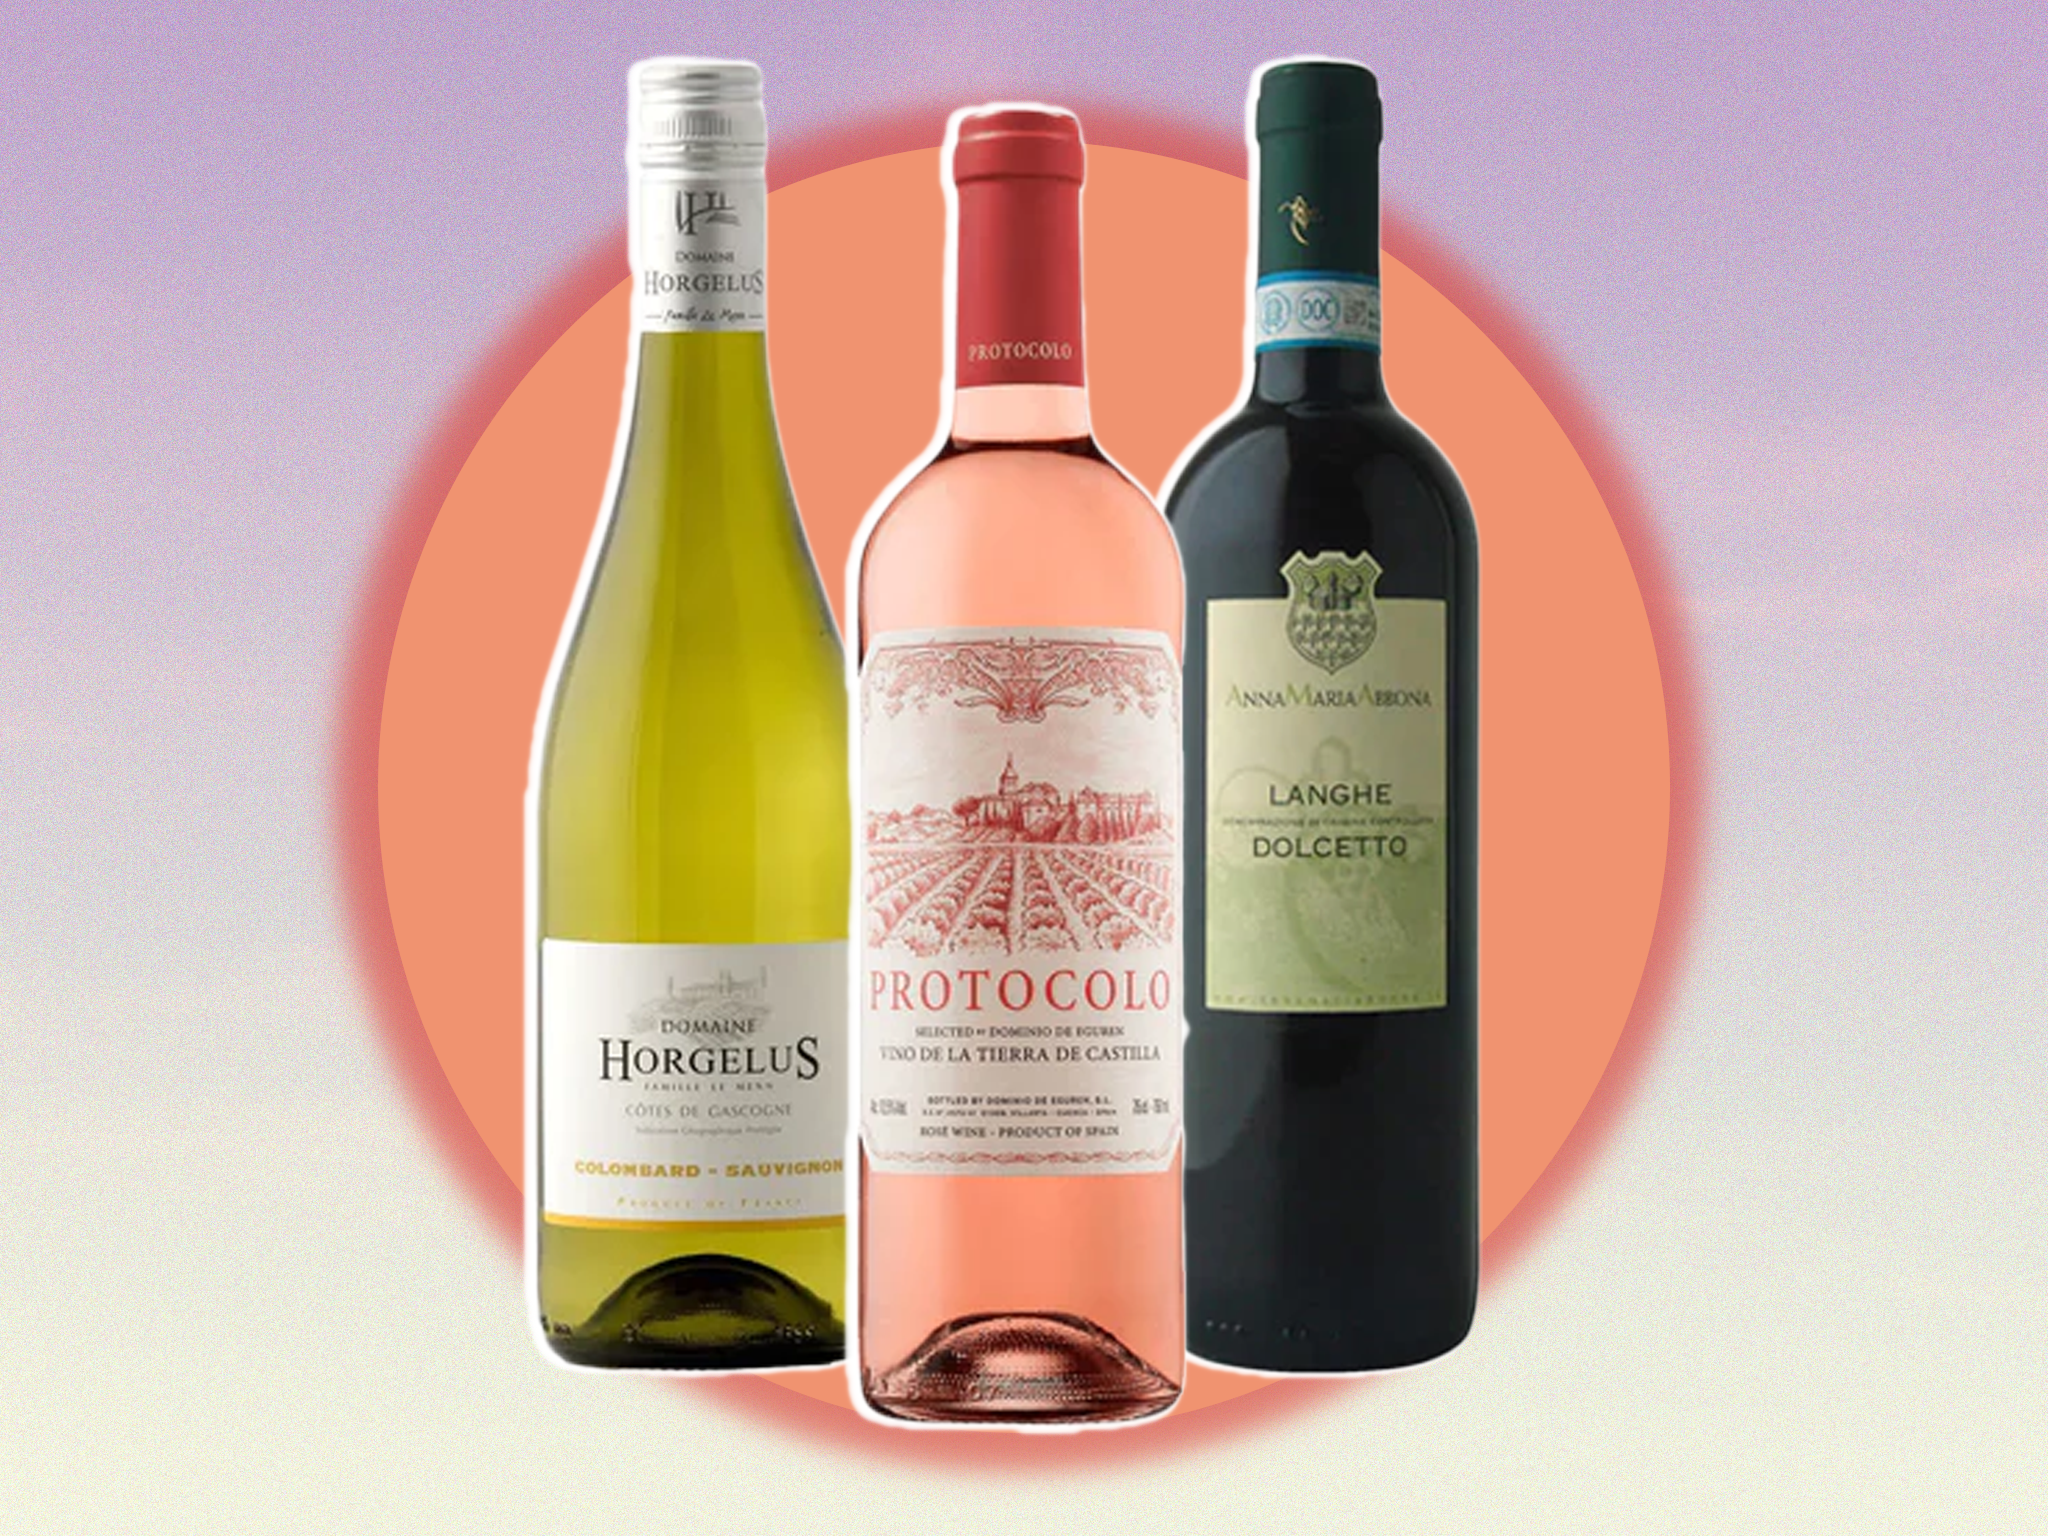 Independent Wine Club fair weather friends: Wines for summer sipping